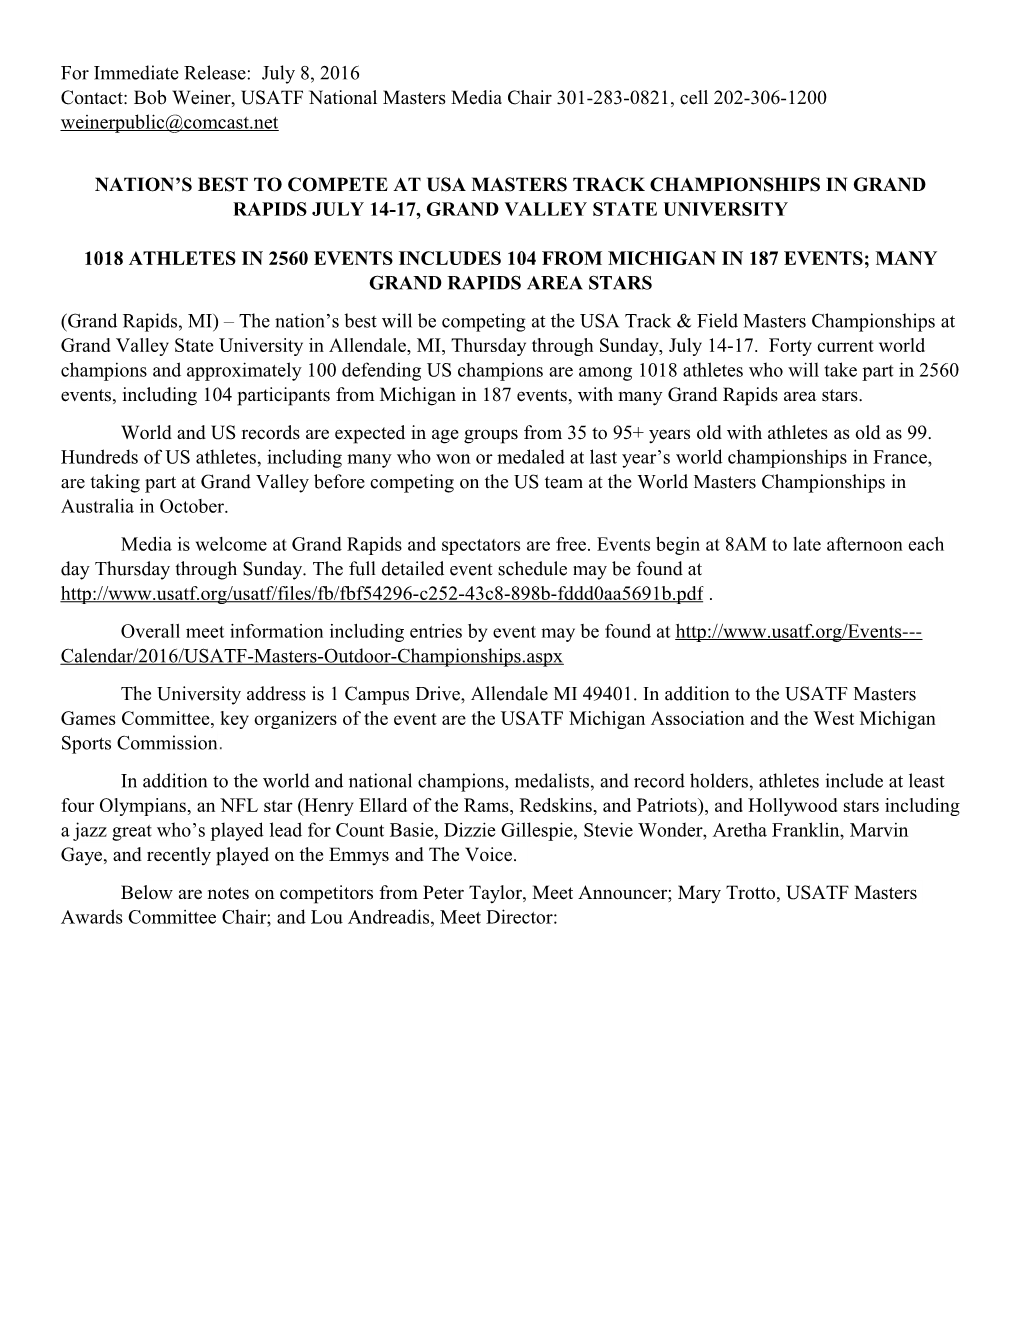 Nation S Best to Compete at Usa Masters Track Championships in Grand Rapids July 14-17